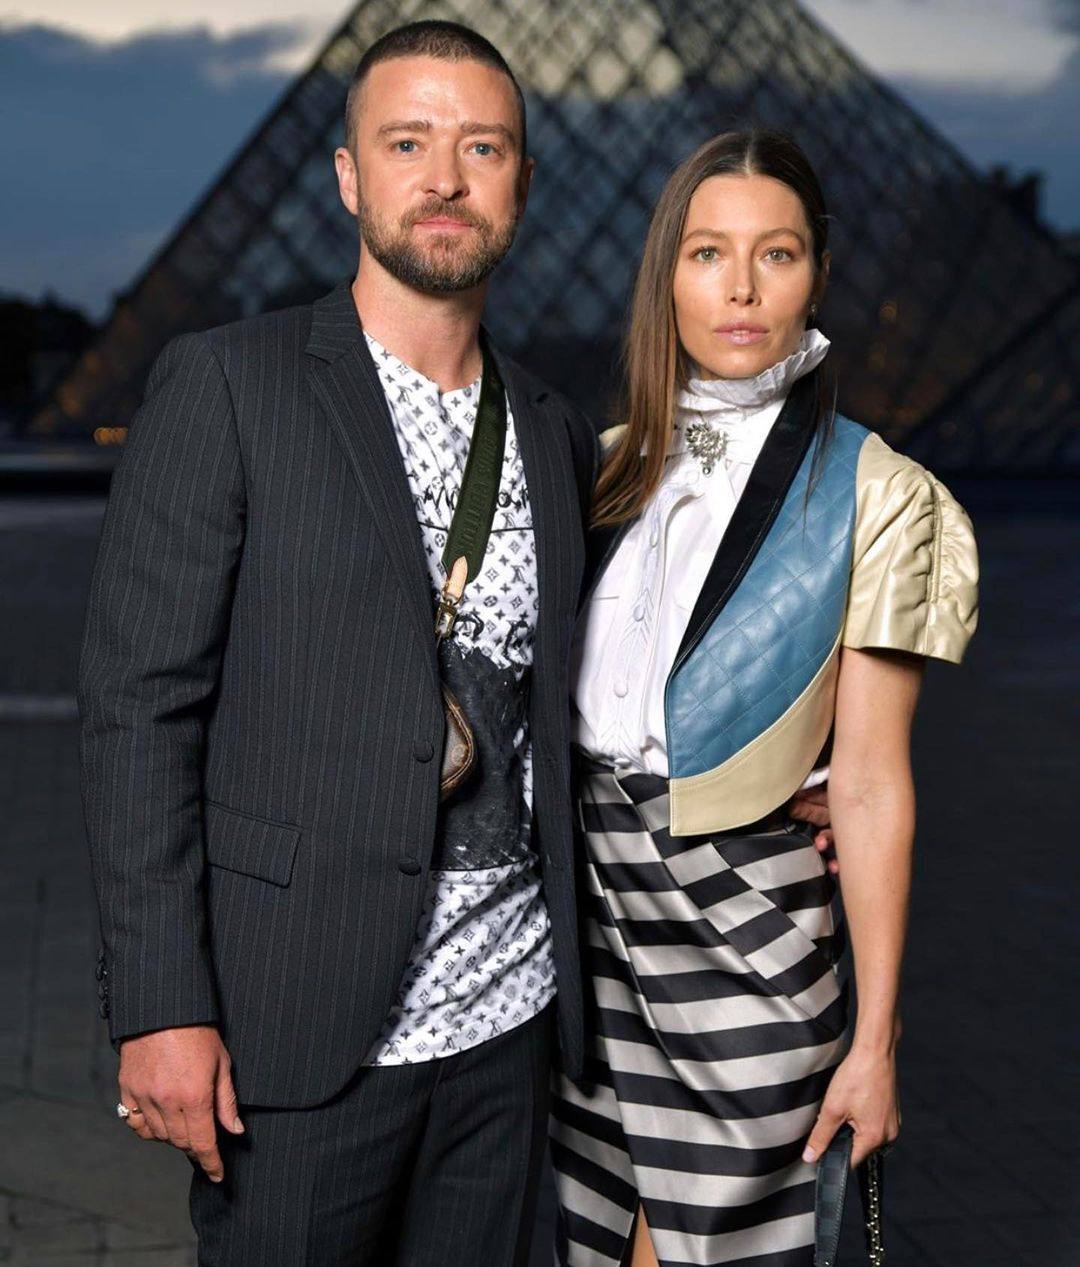 Jessica Biel Dressed Up as 'NSYNC Justin Timberlake for Halloween